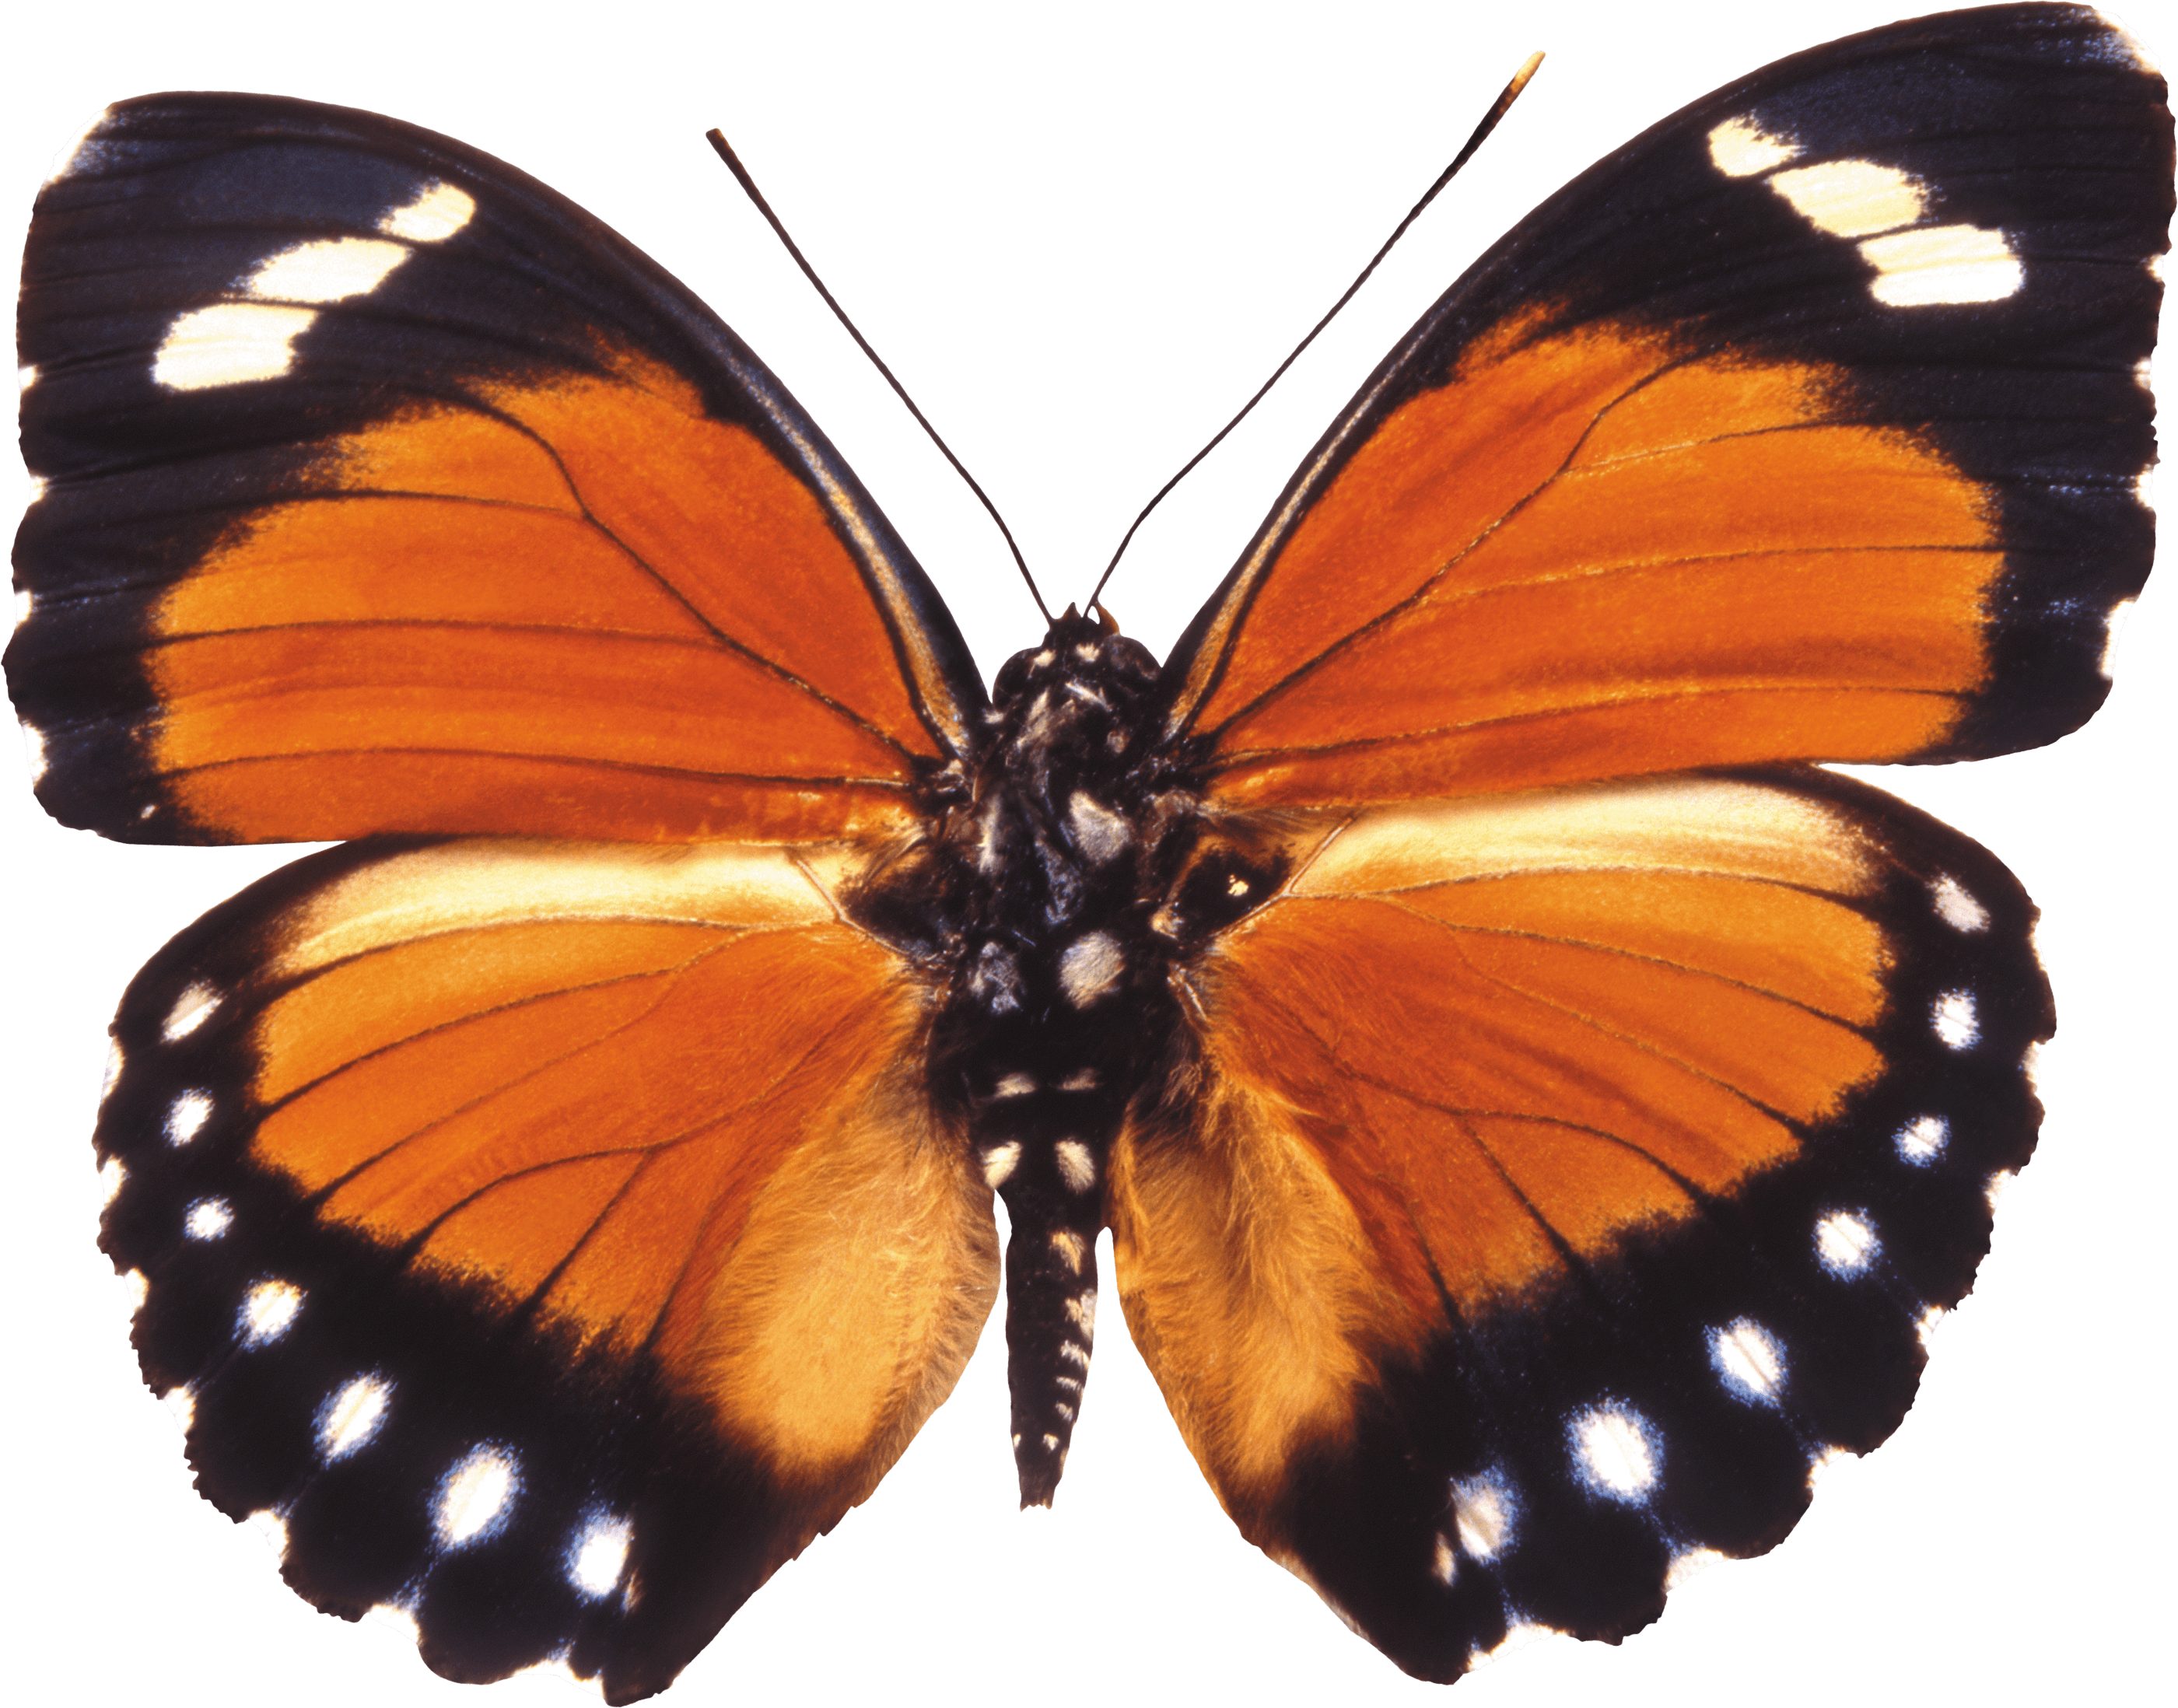 Download Butterfly Png Image HQ PNG Image | FreePNGImg